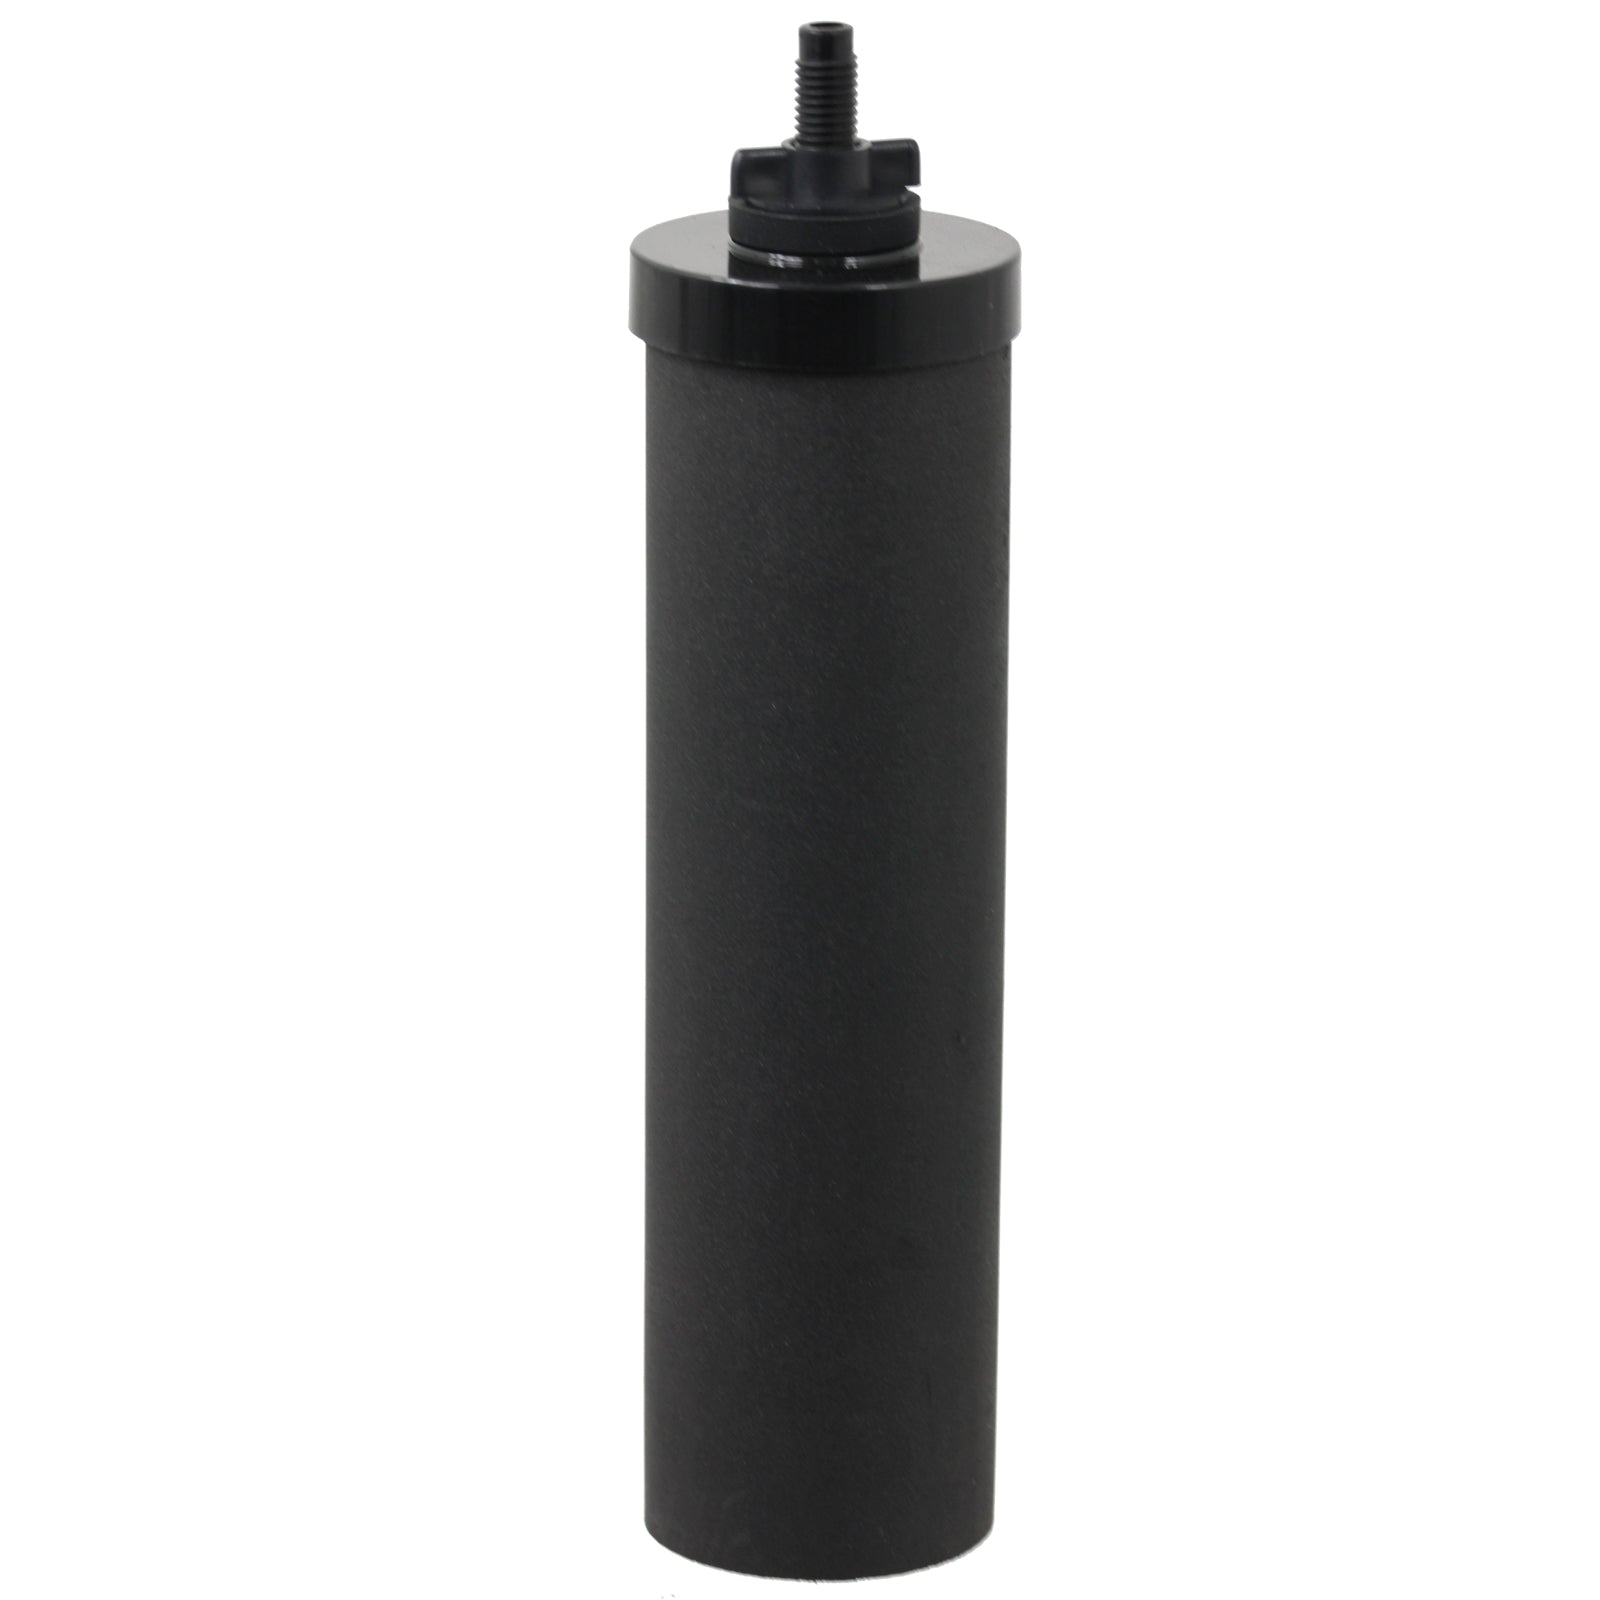 Water Filter Element for Berkey Purification System Cartridge Filters Black x 6